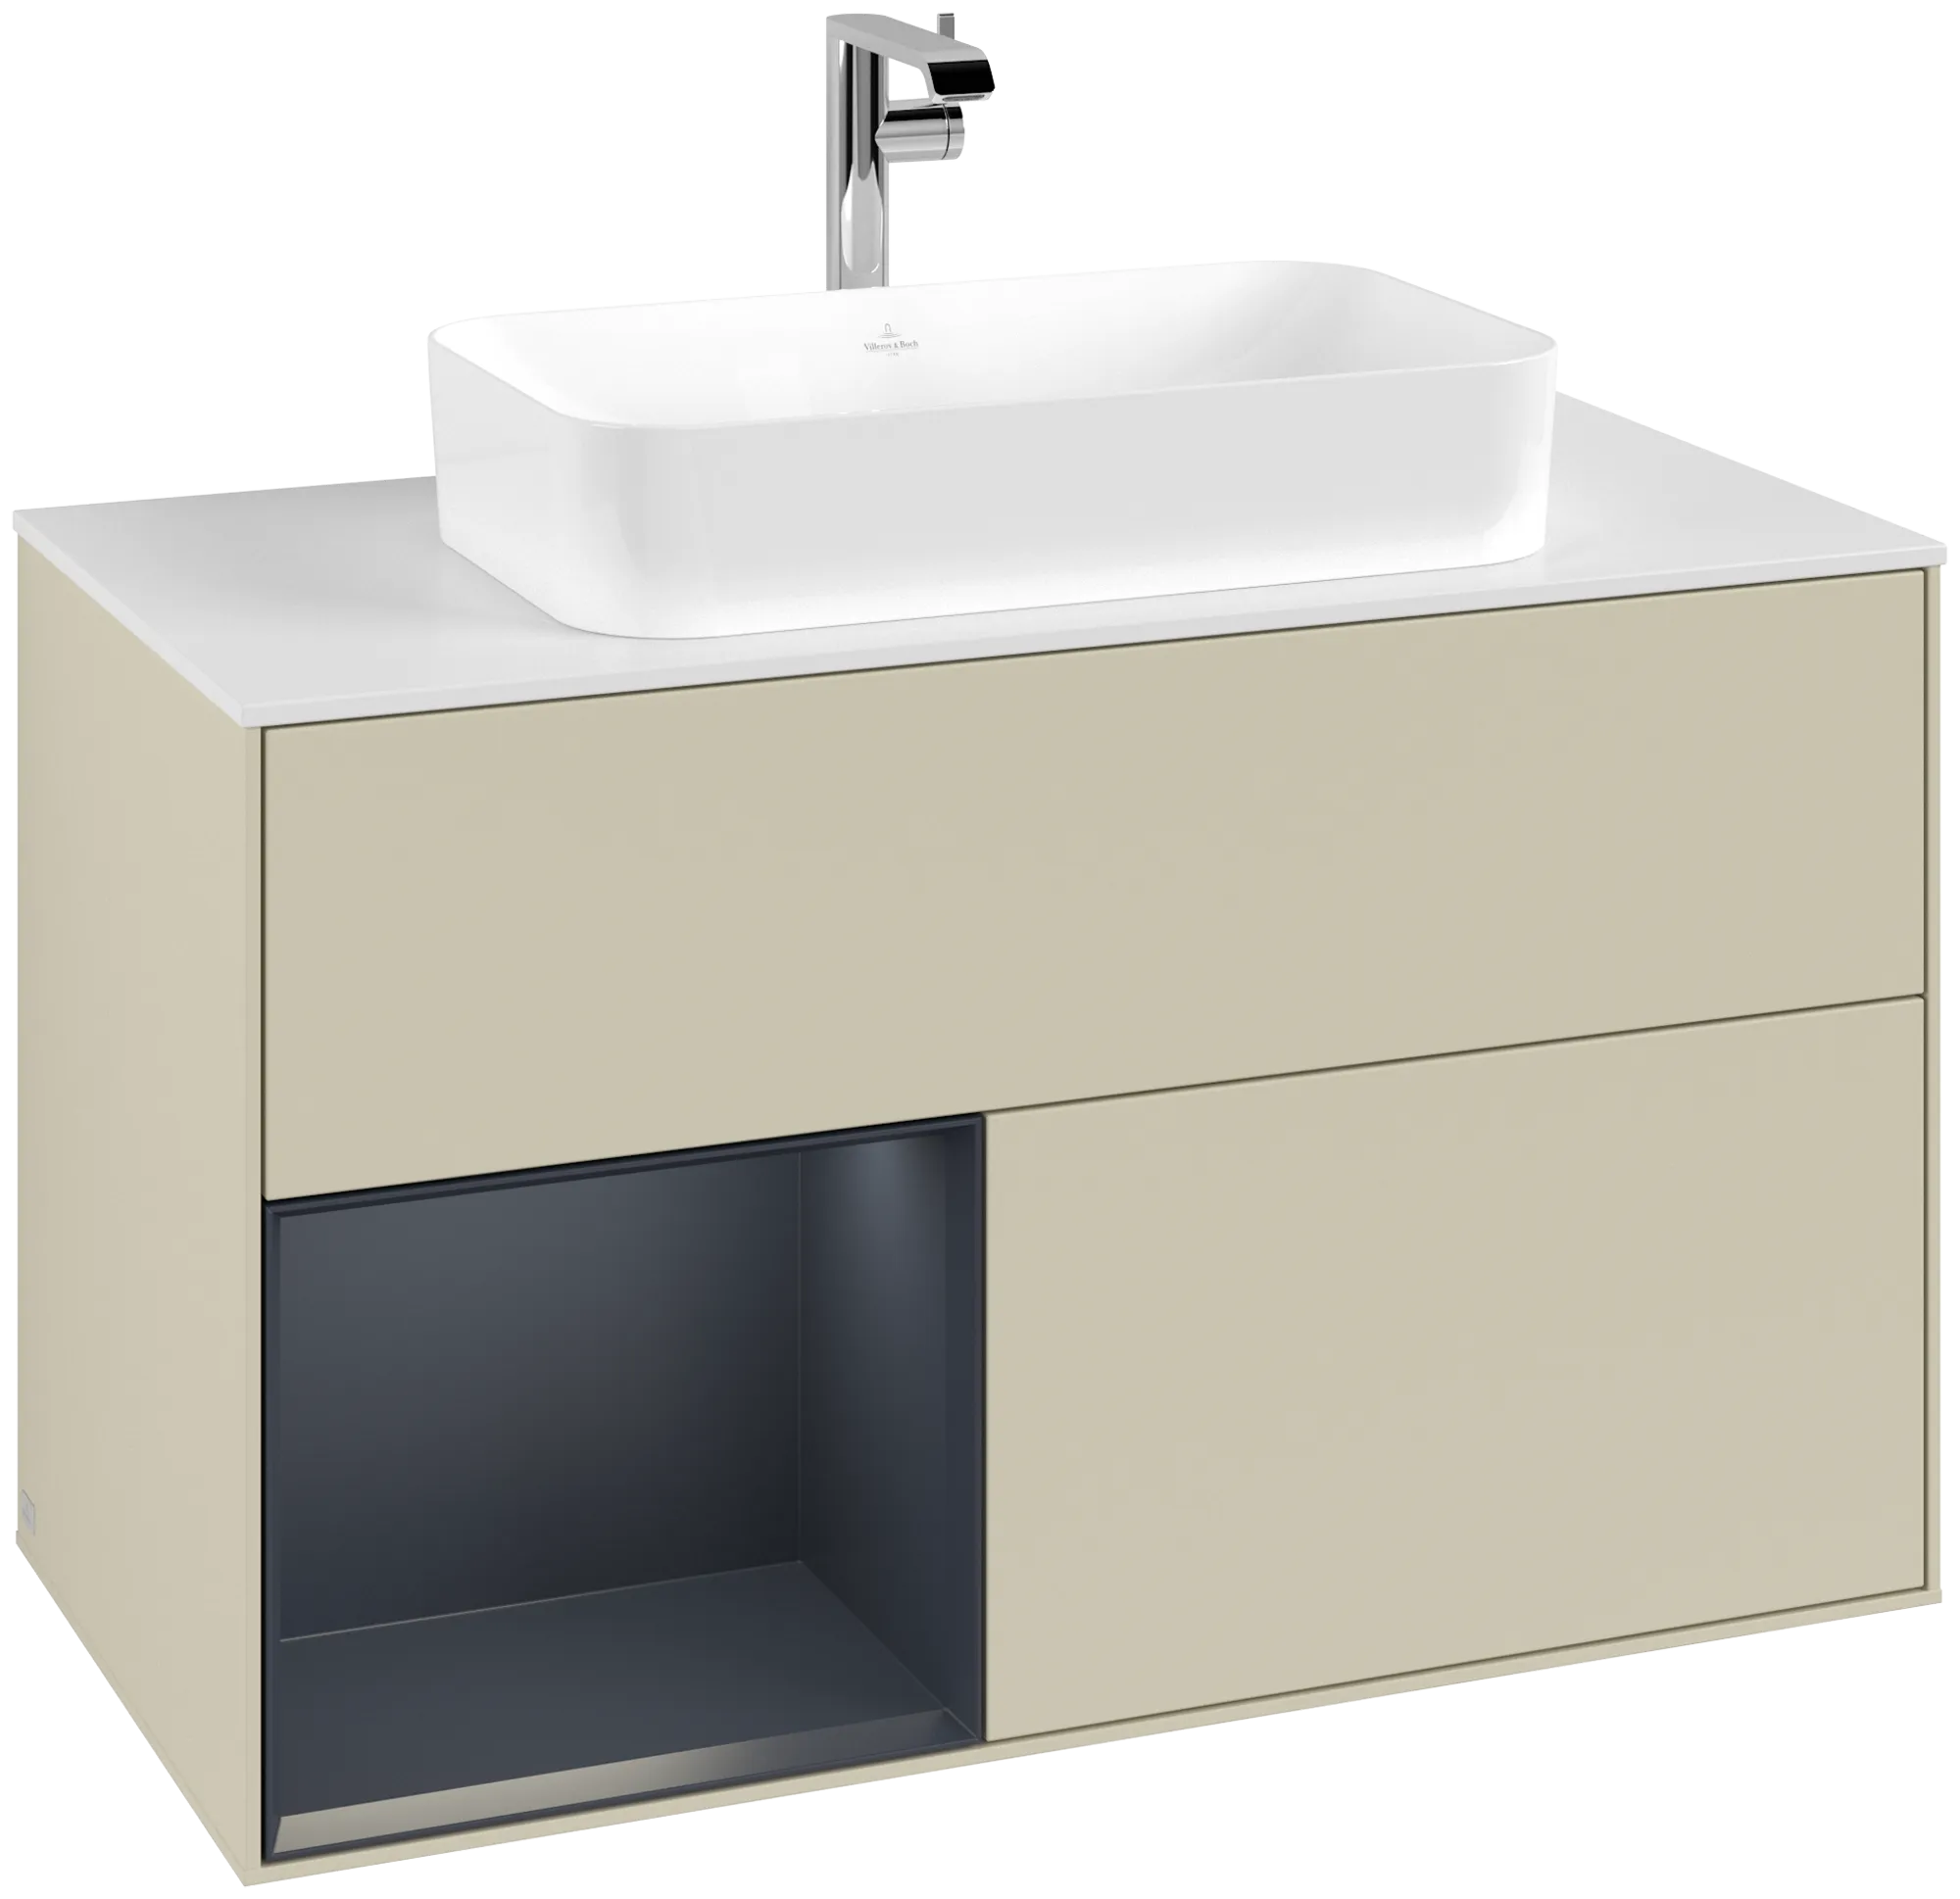 Picture of VILLEROY BOCH Finion Vanity unit, with lighting, 2 pull-out compartments, 1000 x 603 x 501 mm, Silk Grey Matt Lacquer / Midnight Blue Matt Lacquer / Glass White Matt #G241HGHJ